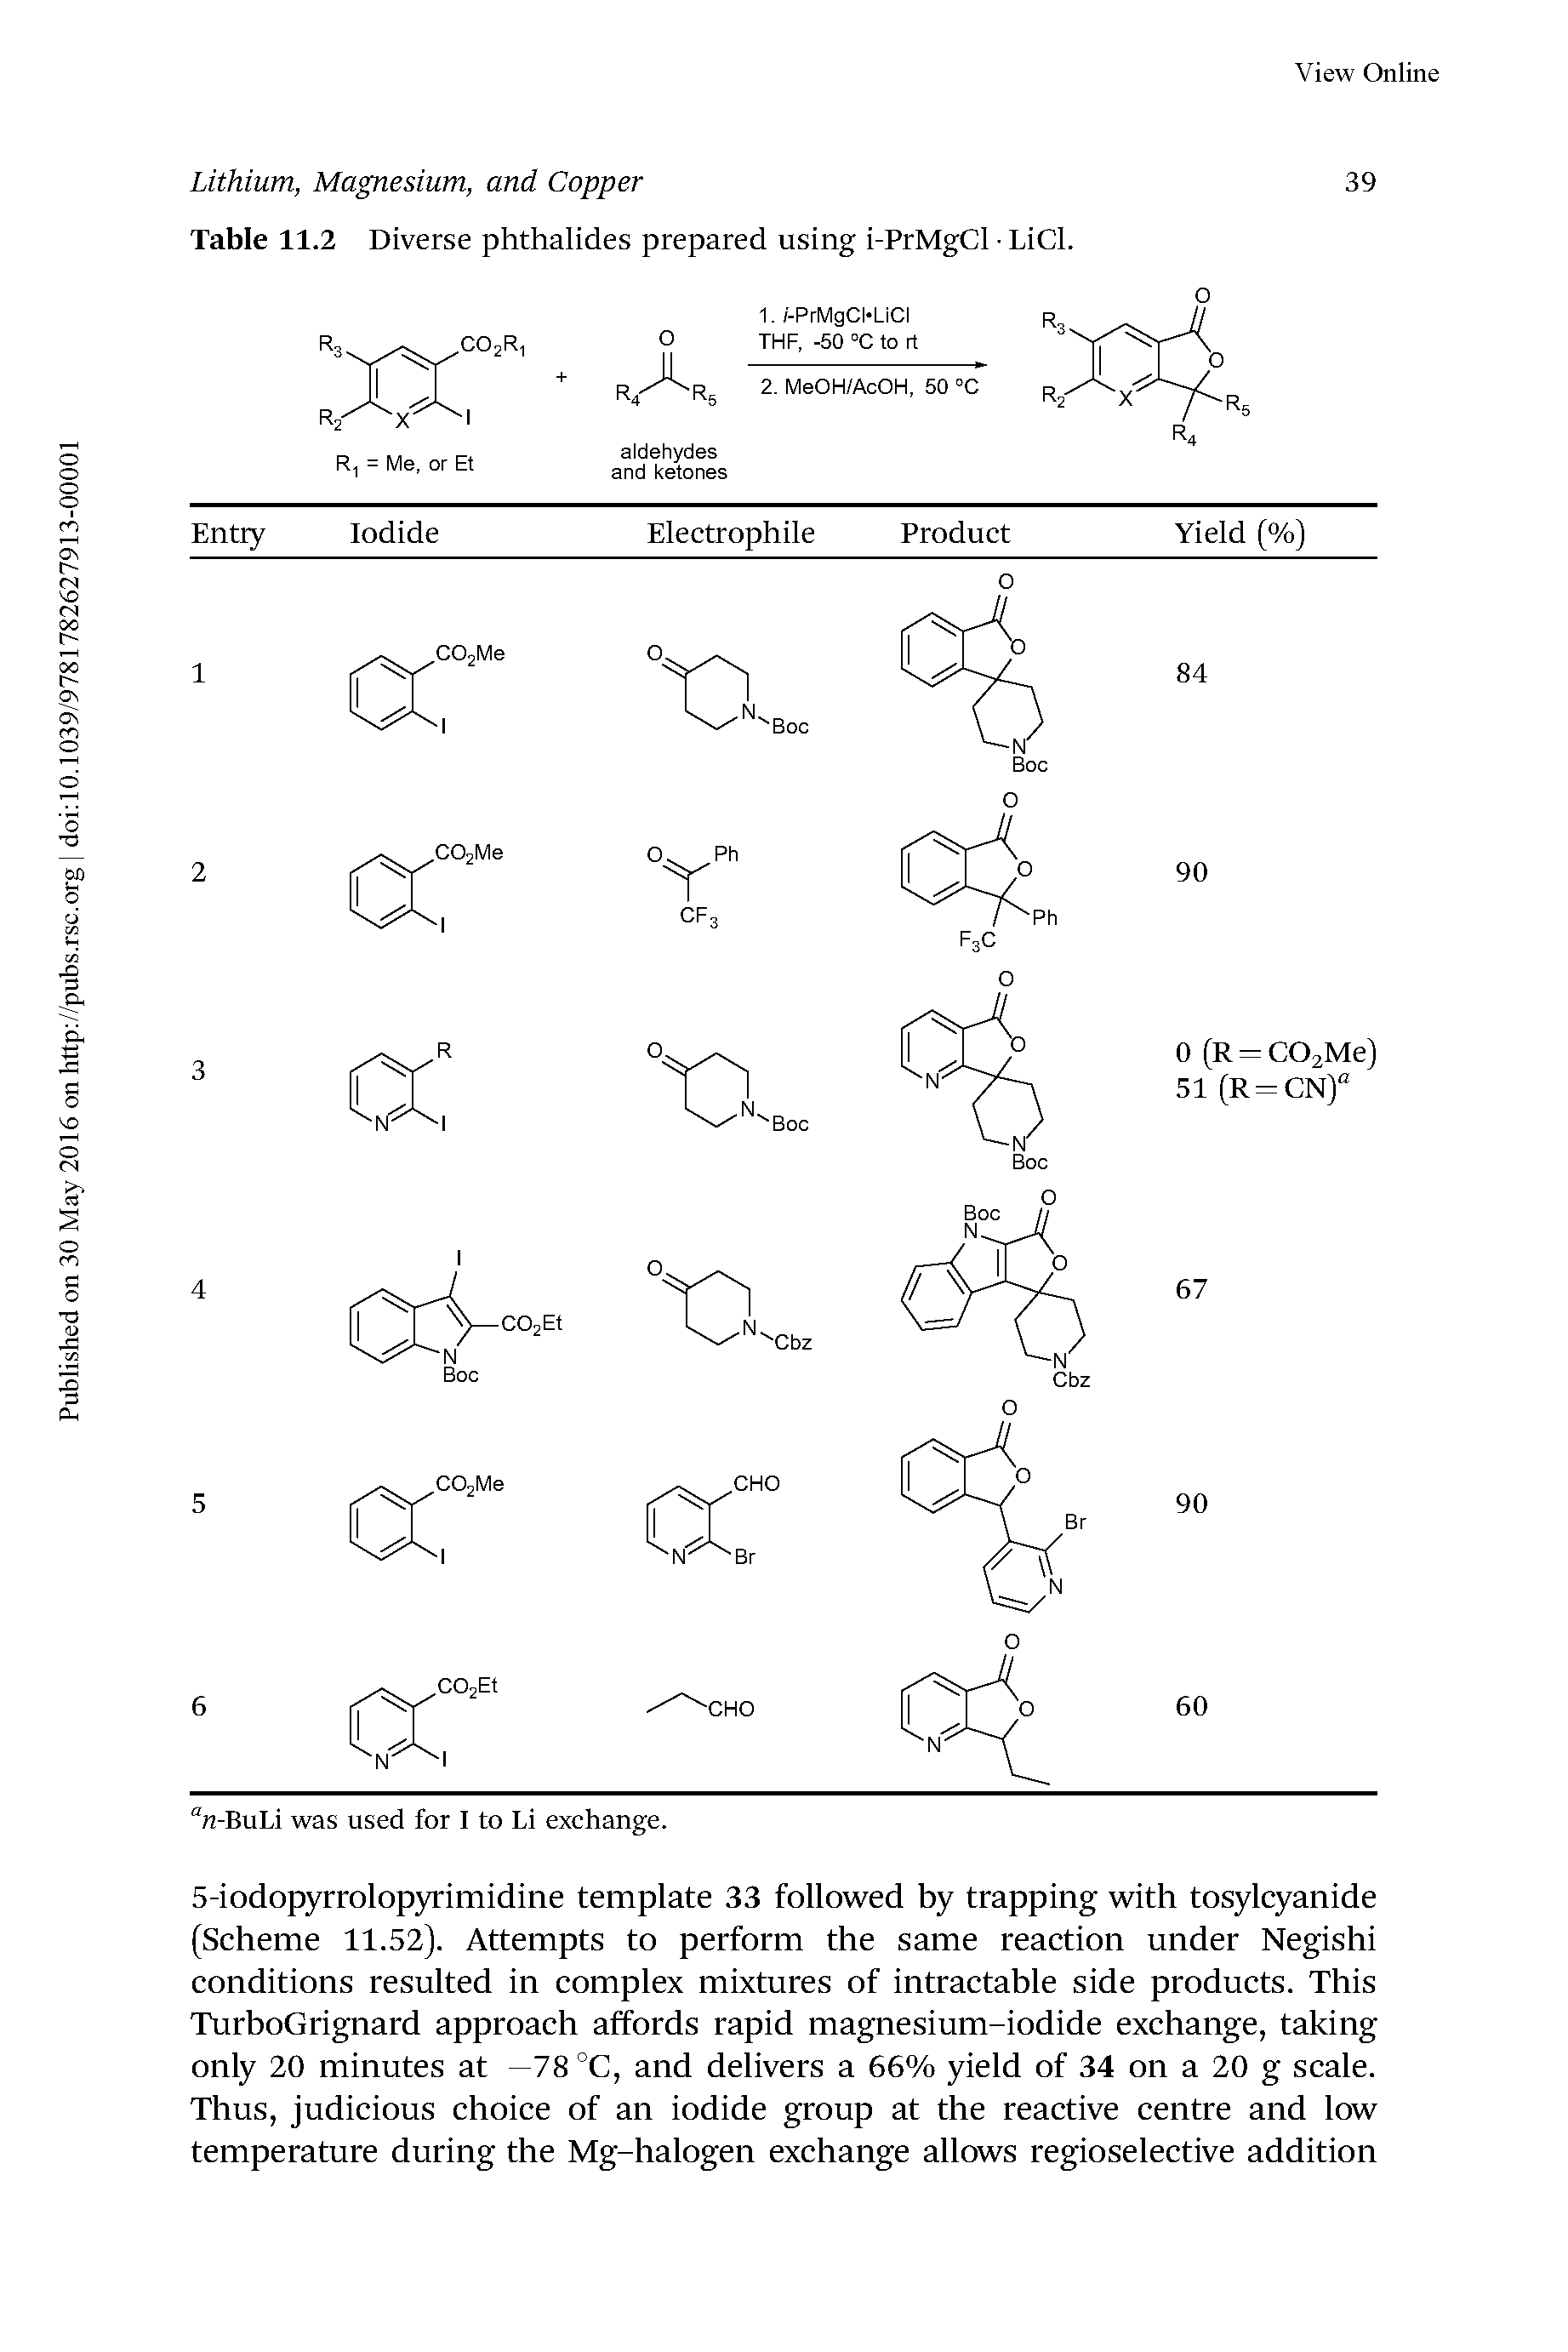 Table 11.2 Diverse phthalides prepared using i-PrMgCl LiCl.